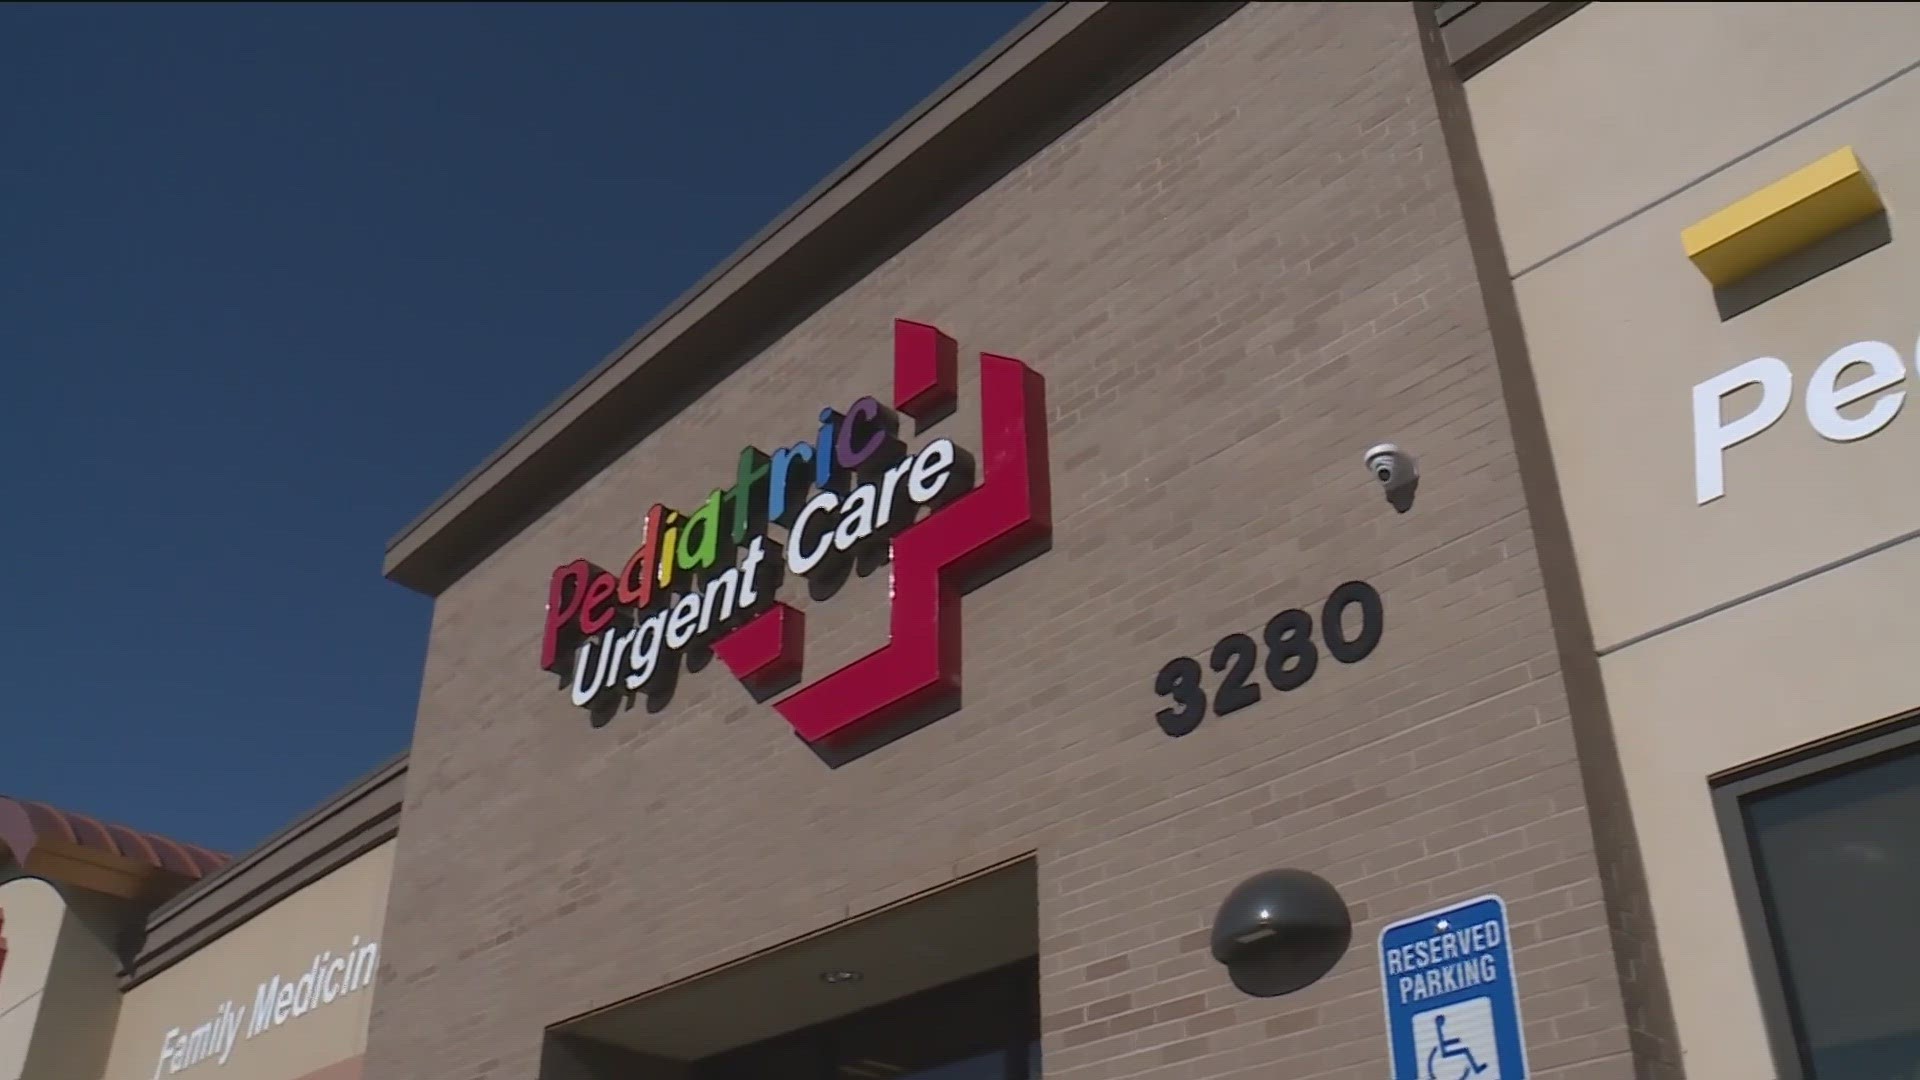 "This new clinic will provide much-needed pediatric care in Canyon County, furthering our mission of increasing access to high-quality care in the Treasure Valley."